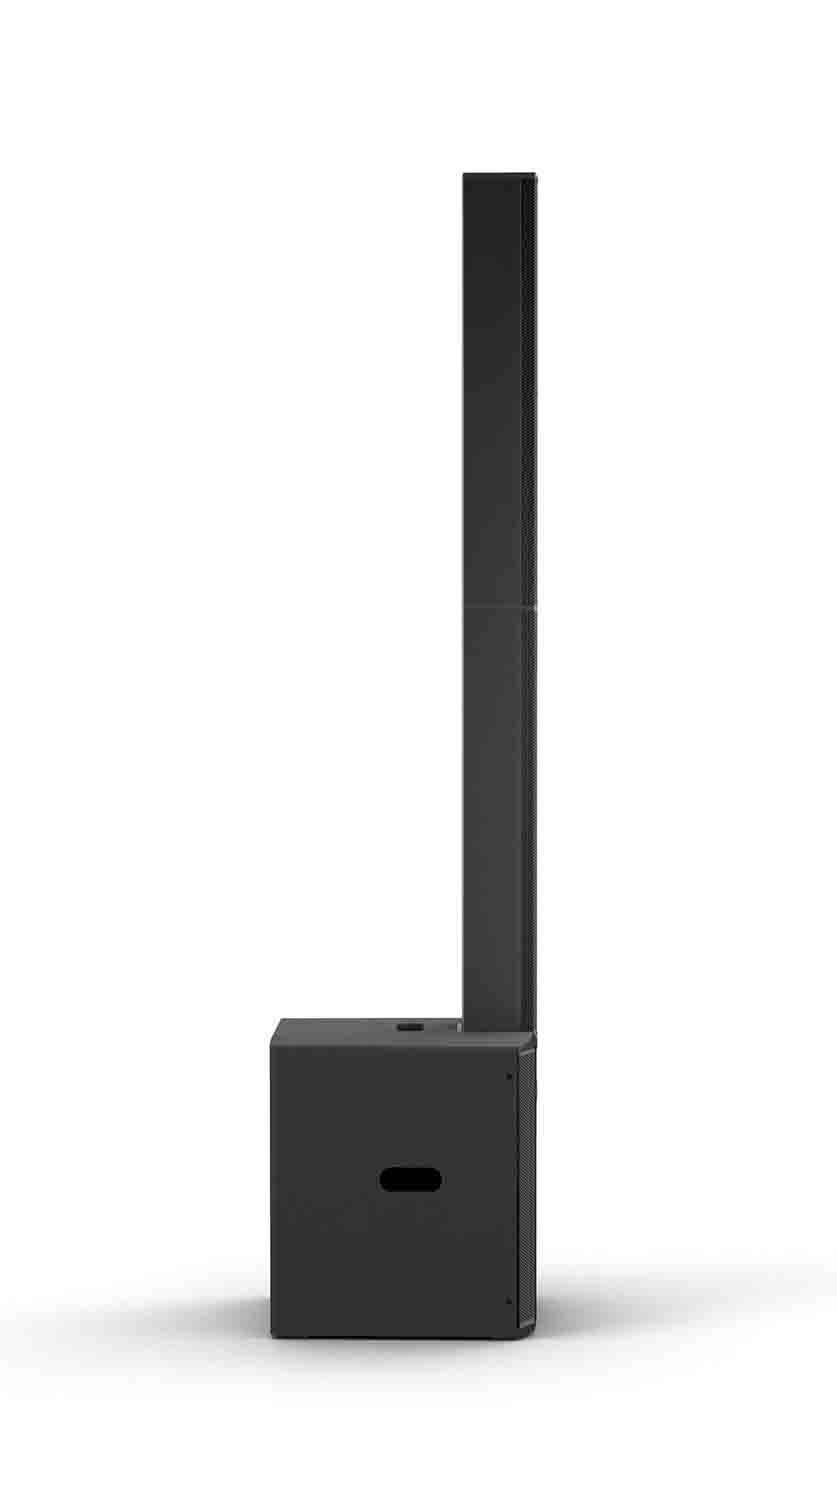 B-Stock: LD System MAUI 28 G3 Compact Cardioid Powered Column PA System - Black by LD Systems